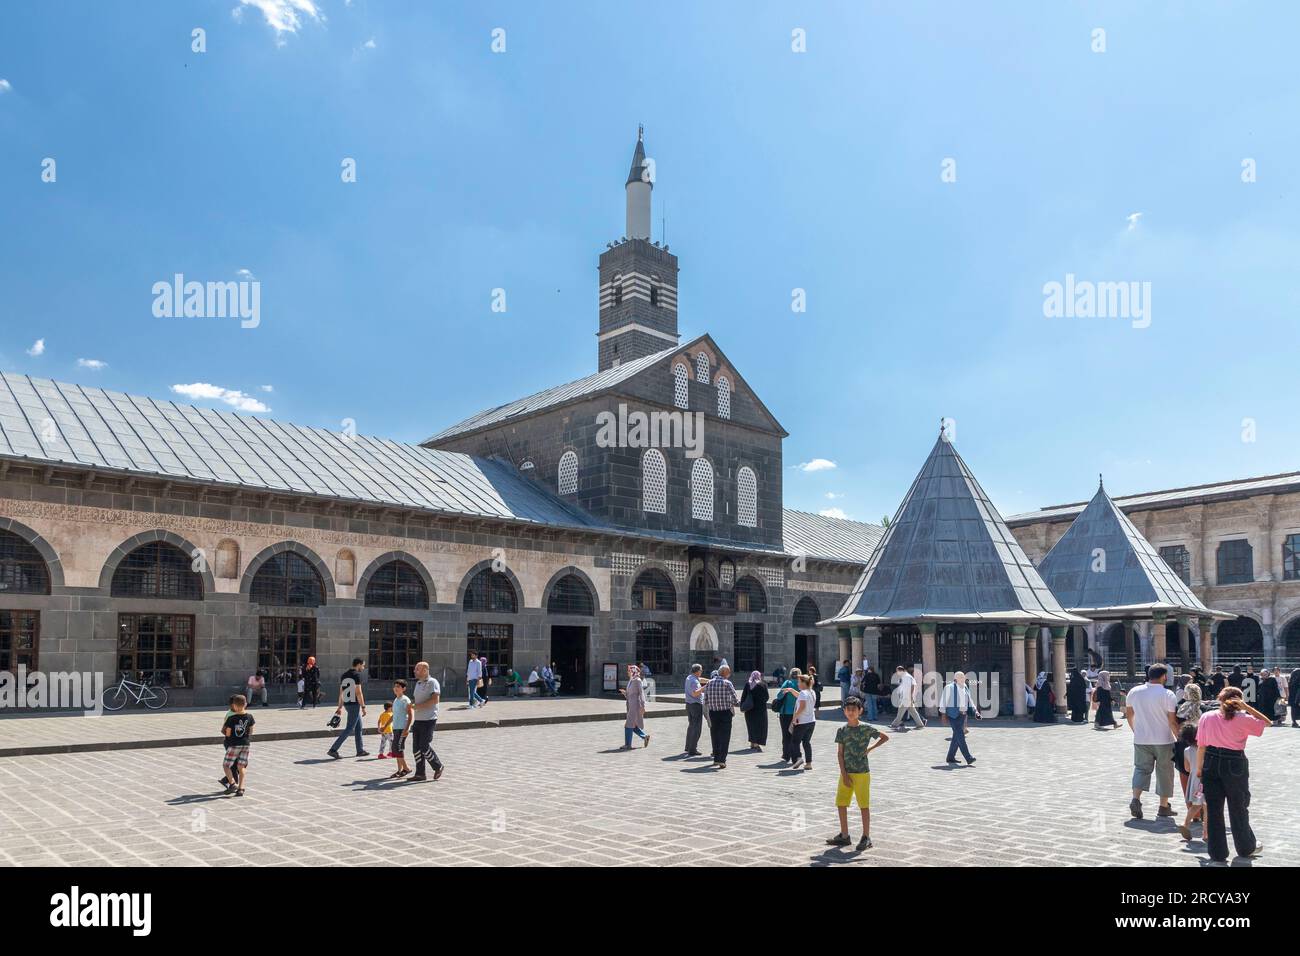 Diyarbakir Ulu Mosque, located in Turkey, is a historical monument located on the walls of Diyarbakir Castle, to the west of the axis connecting the H Stock Photo